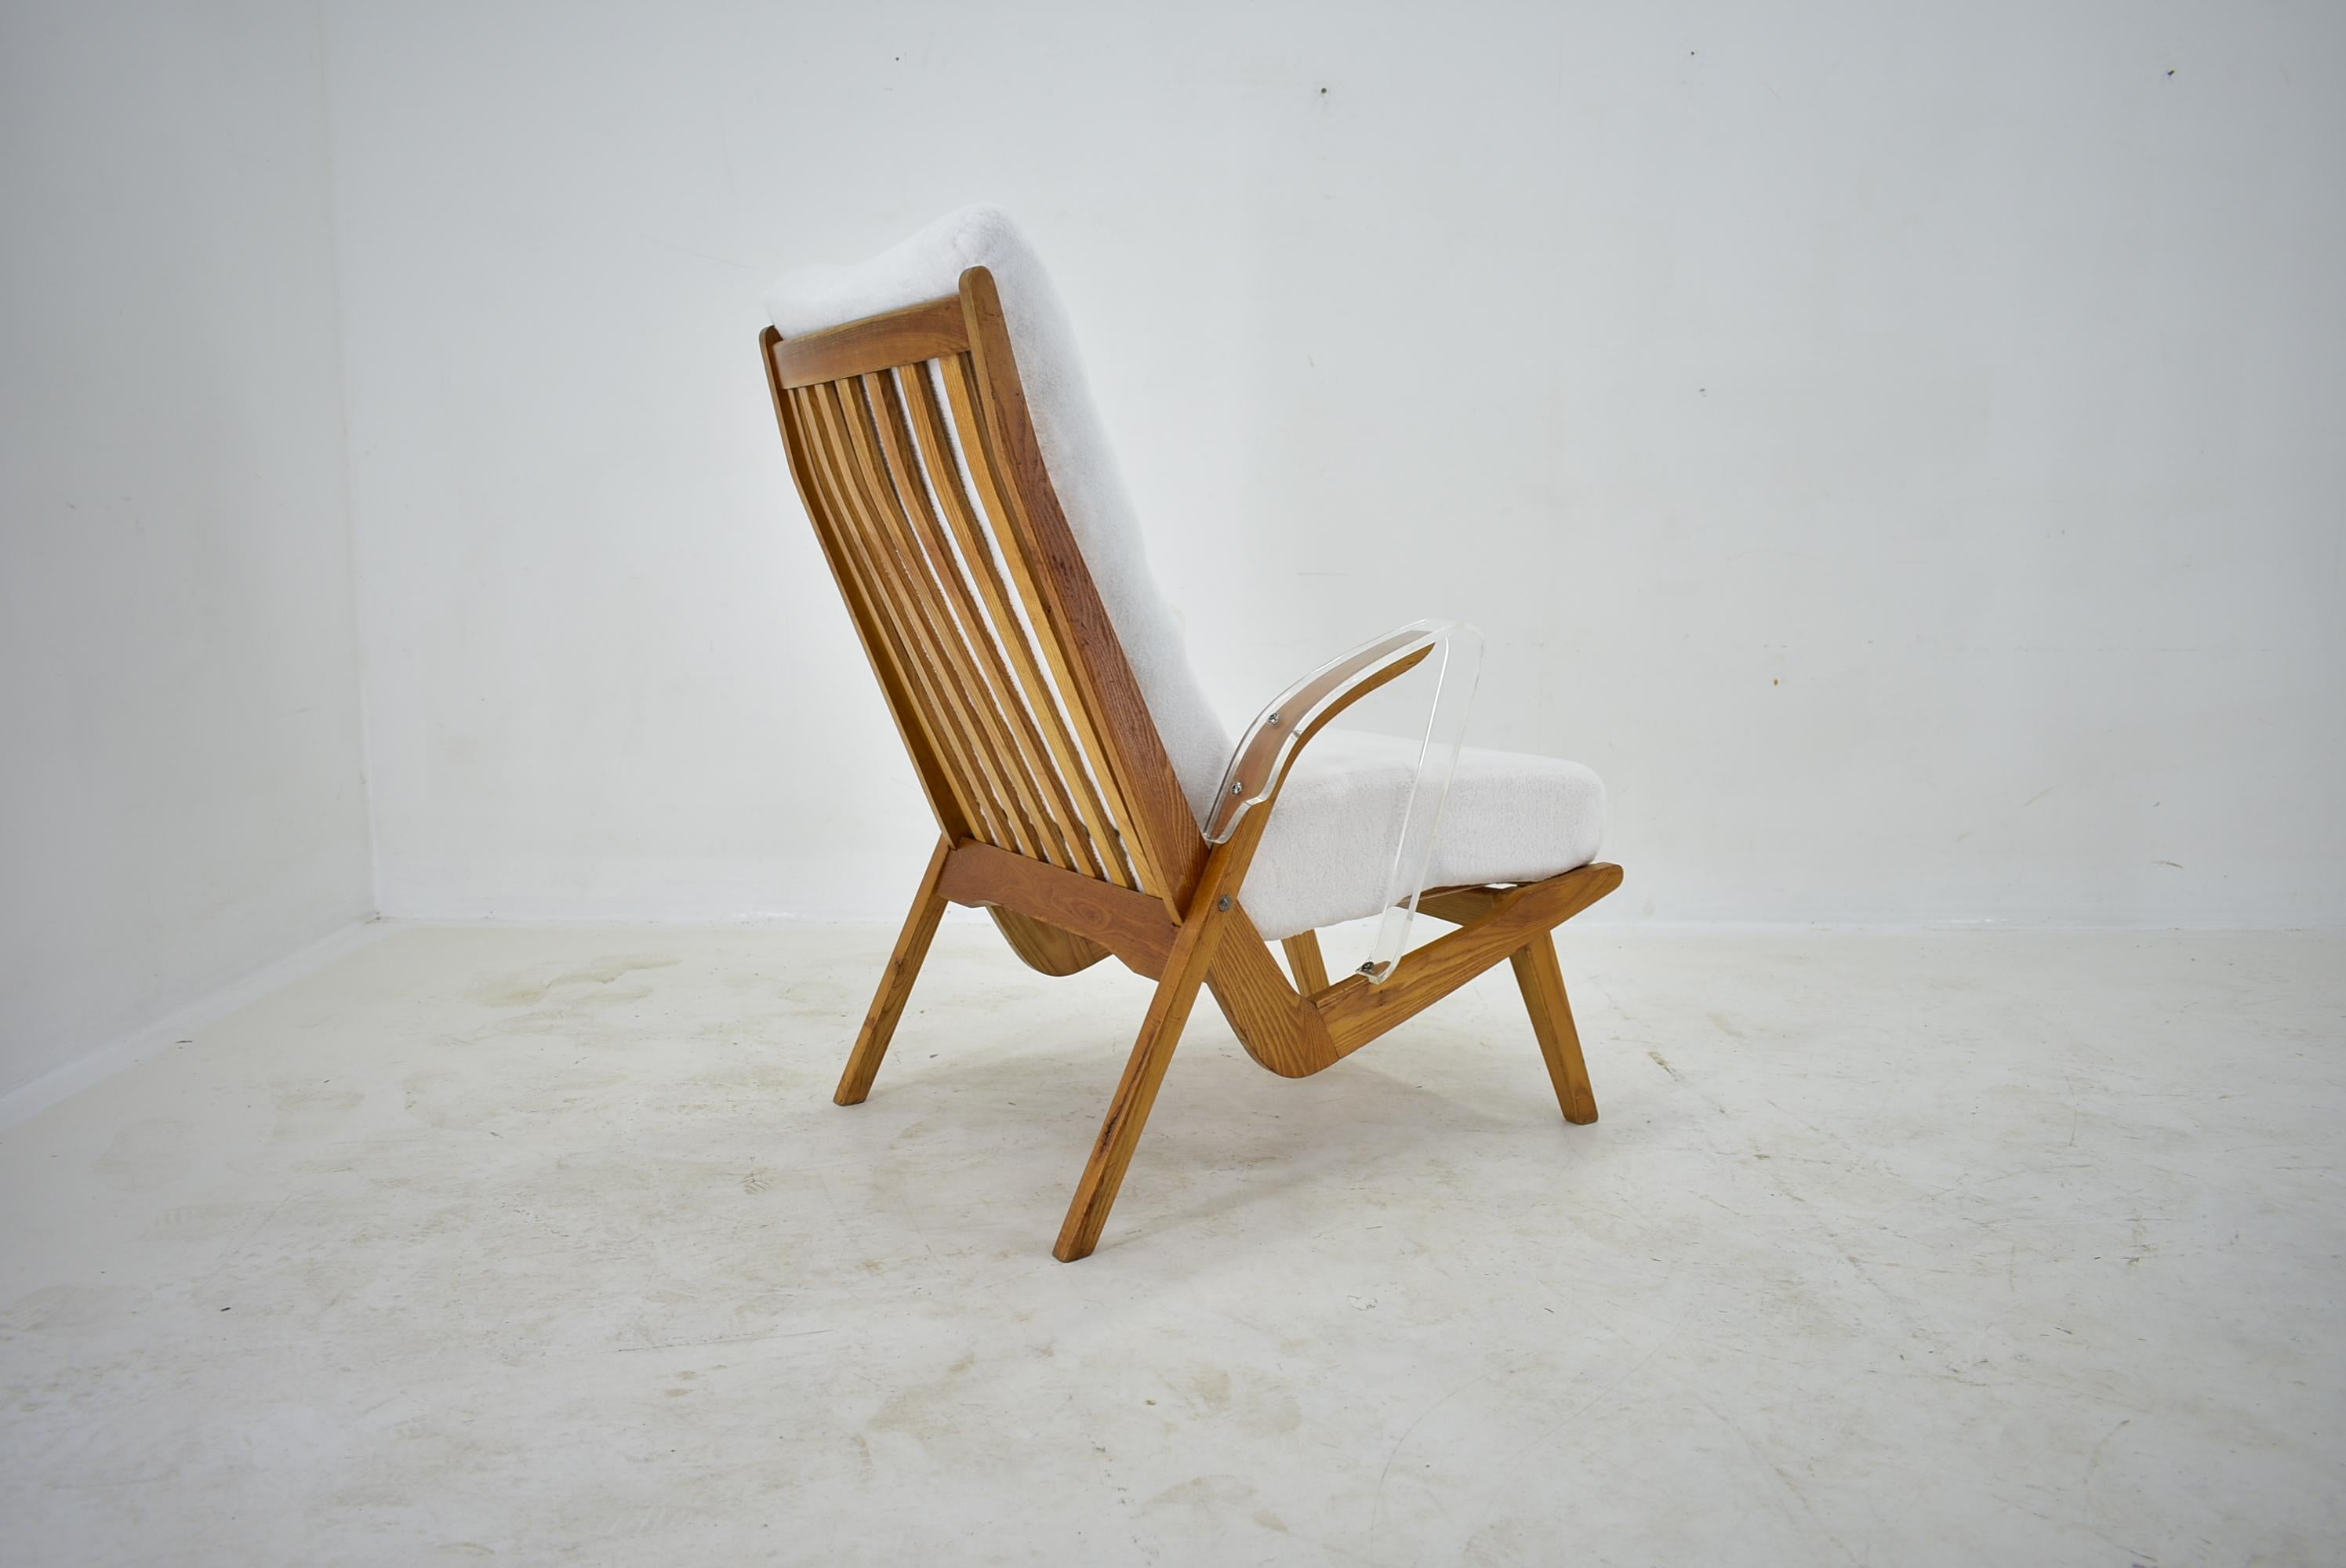 - New Fabric
- wooden parts have been refurbished
- Height of seat 45 cm.






